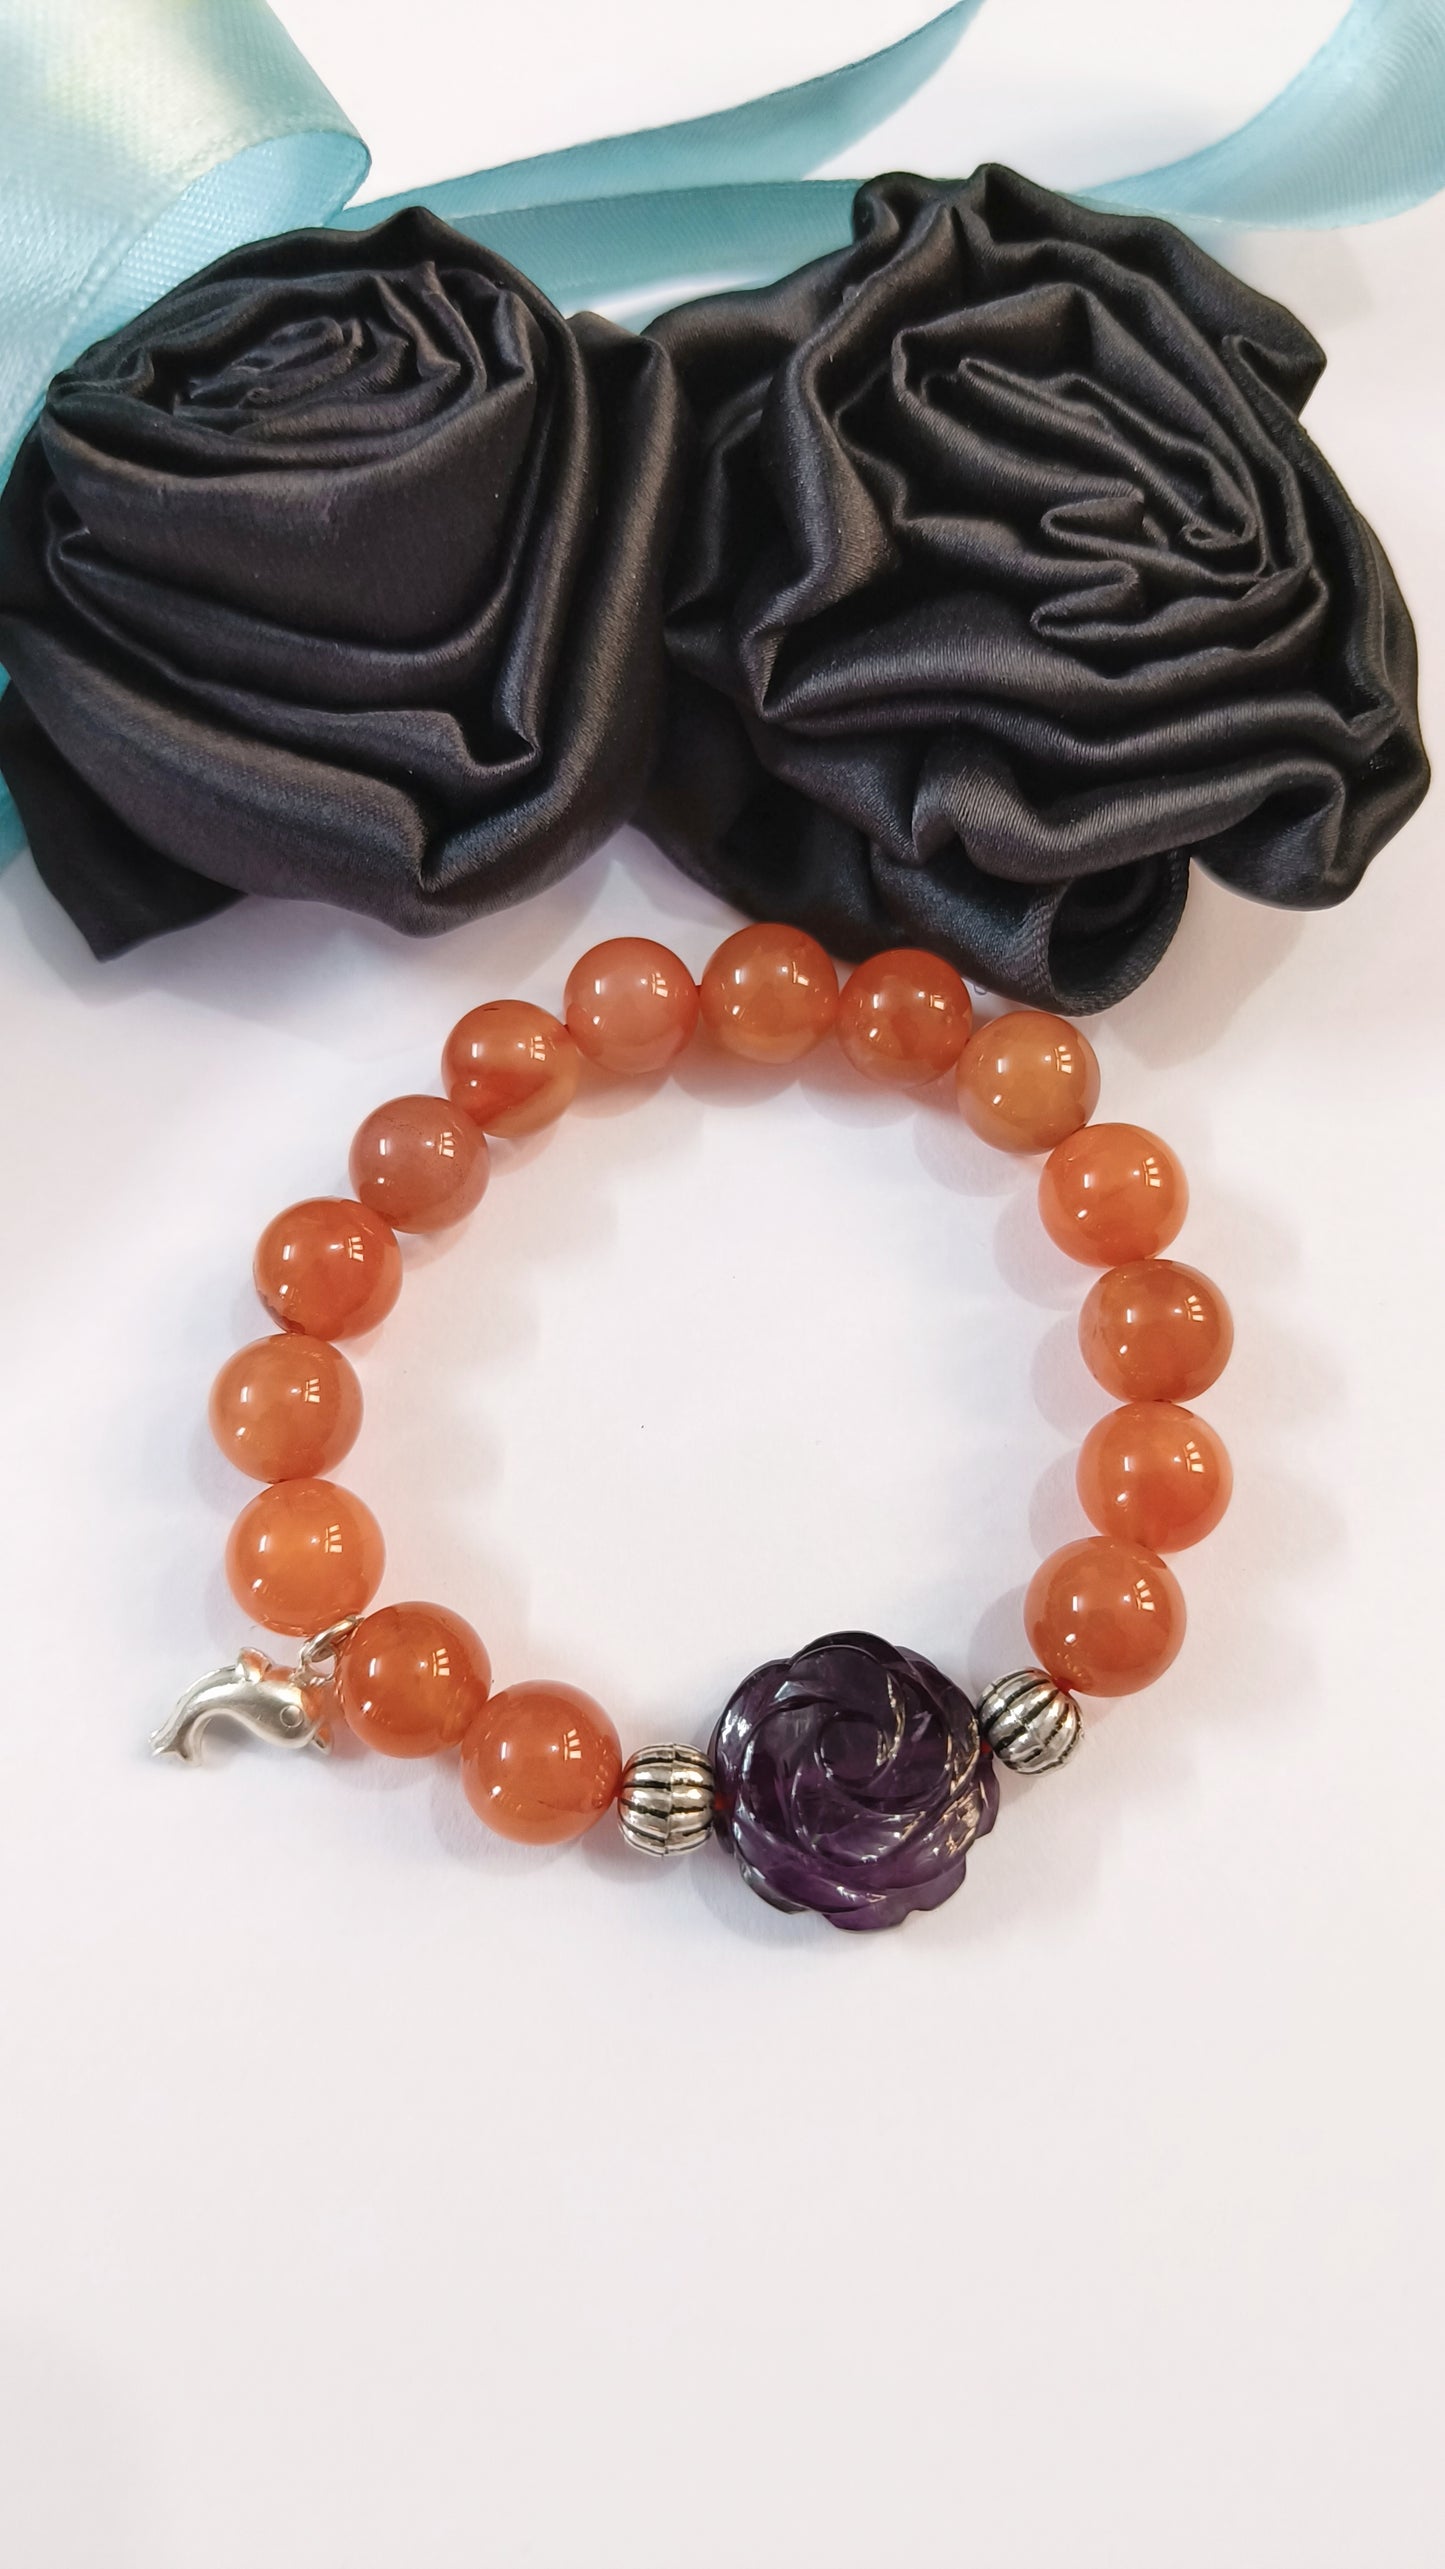 Natural Amethyst Flower Hand Carving, Carnelian Carving with Amethyst and Carnelian Beads Bracelet